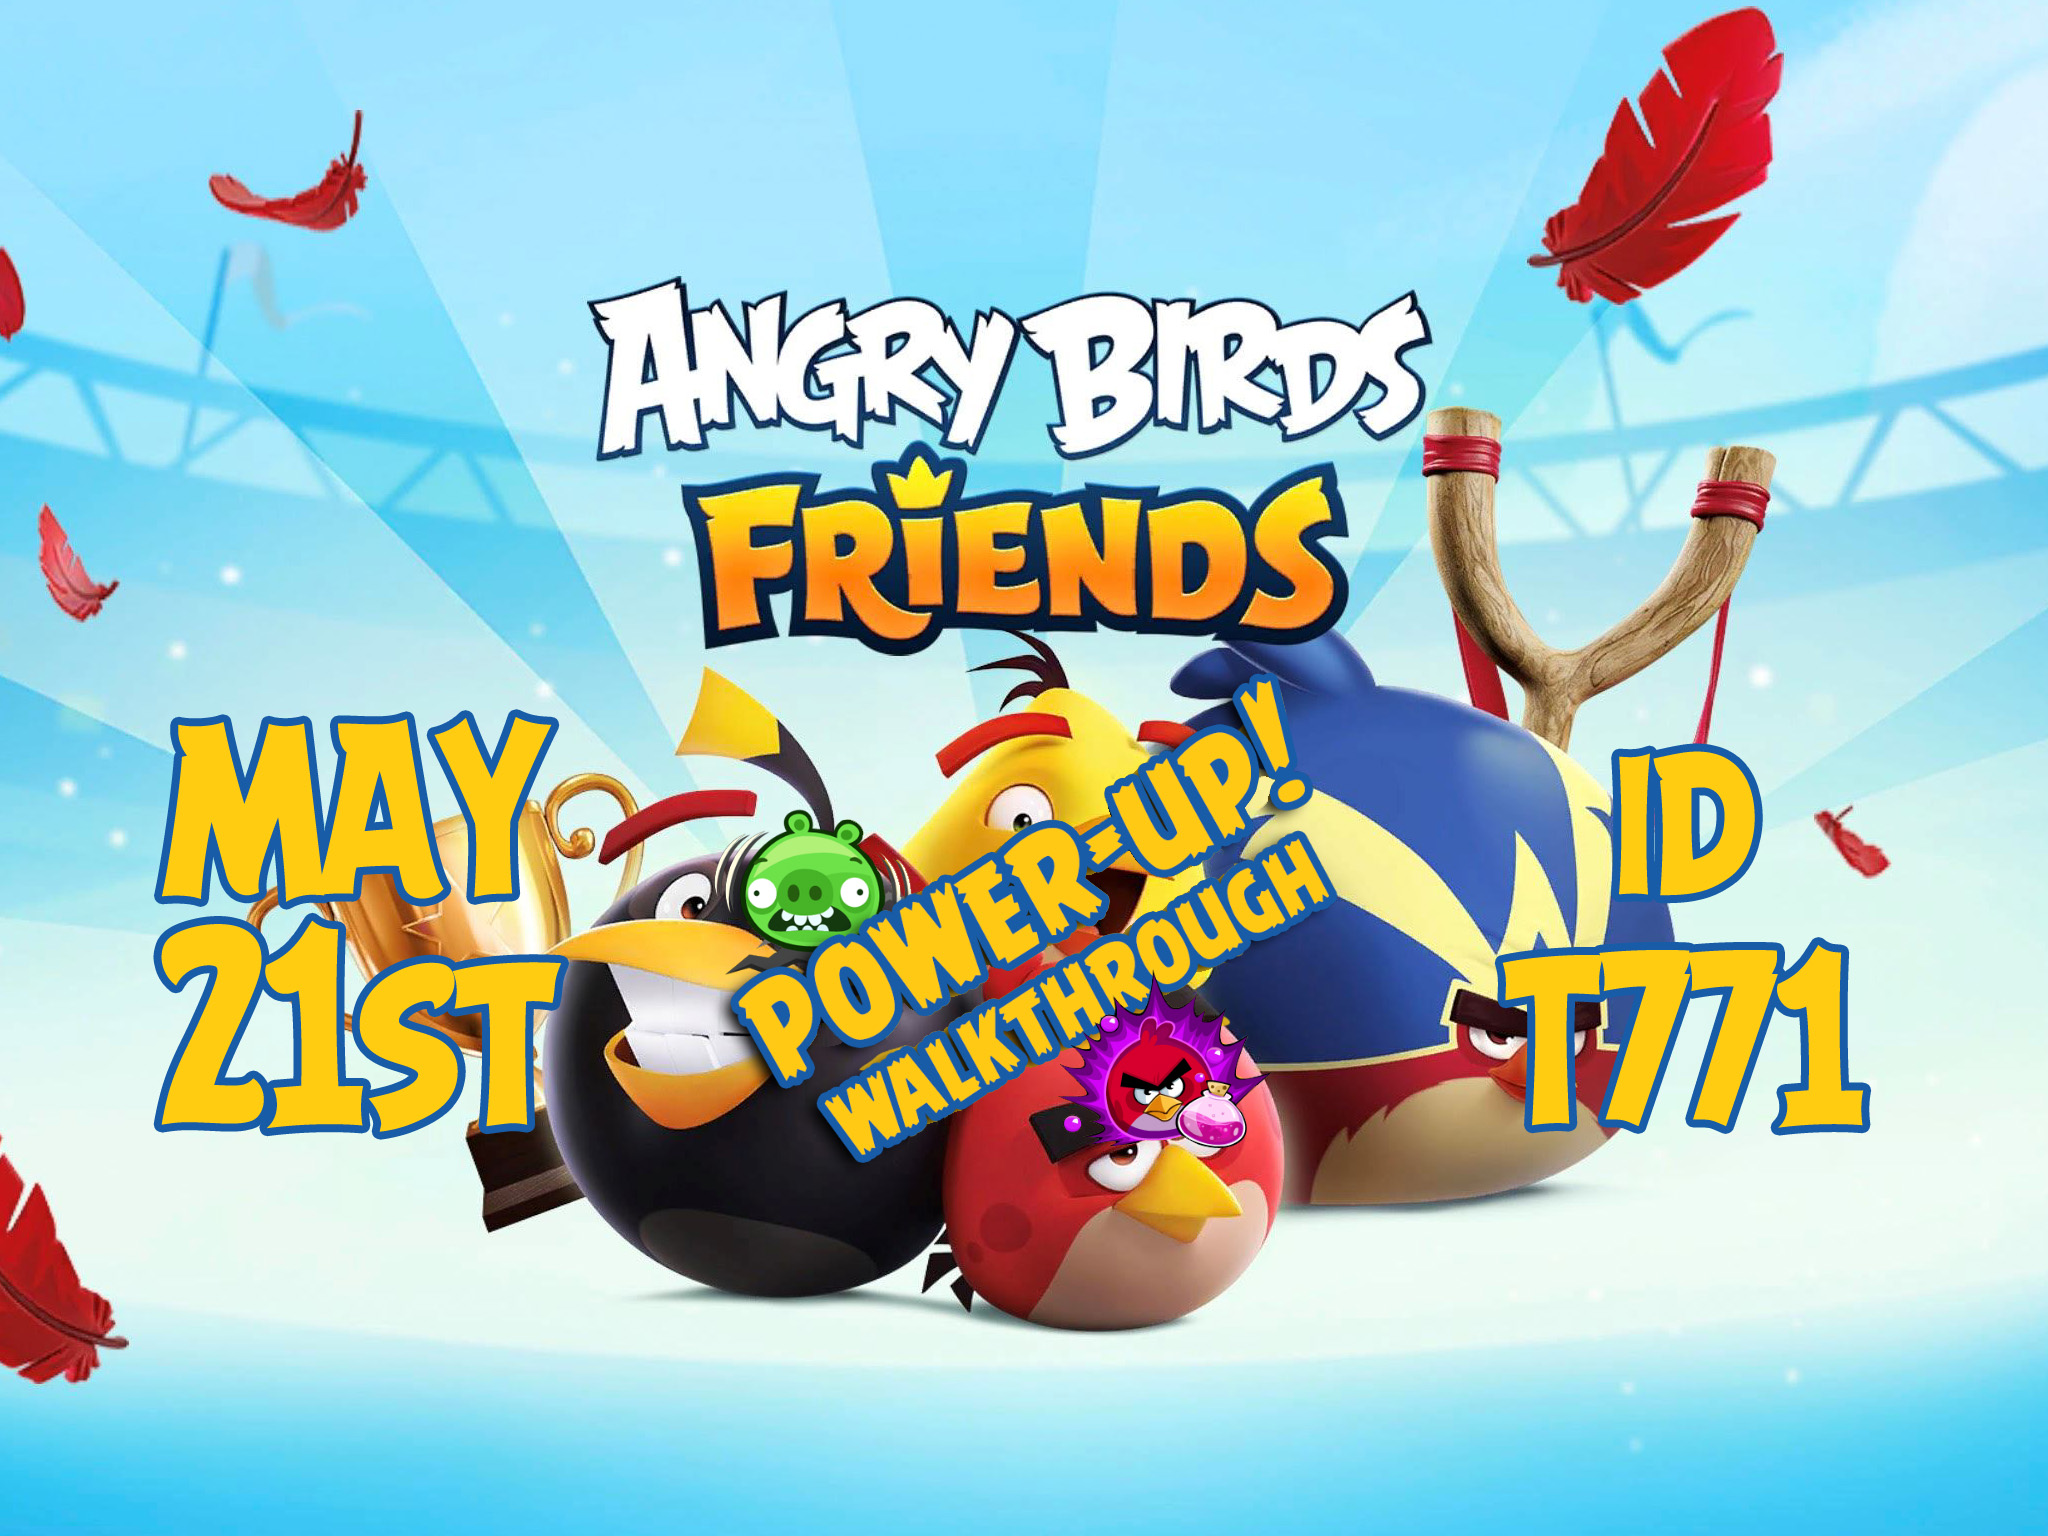 Angry-Birds-Friends-Tournament-T771-Feature-Image-PU